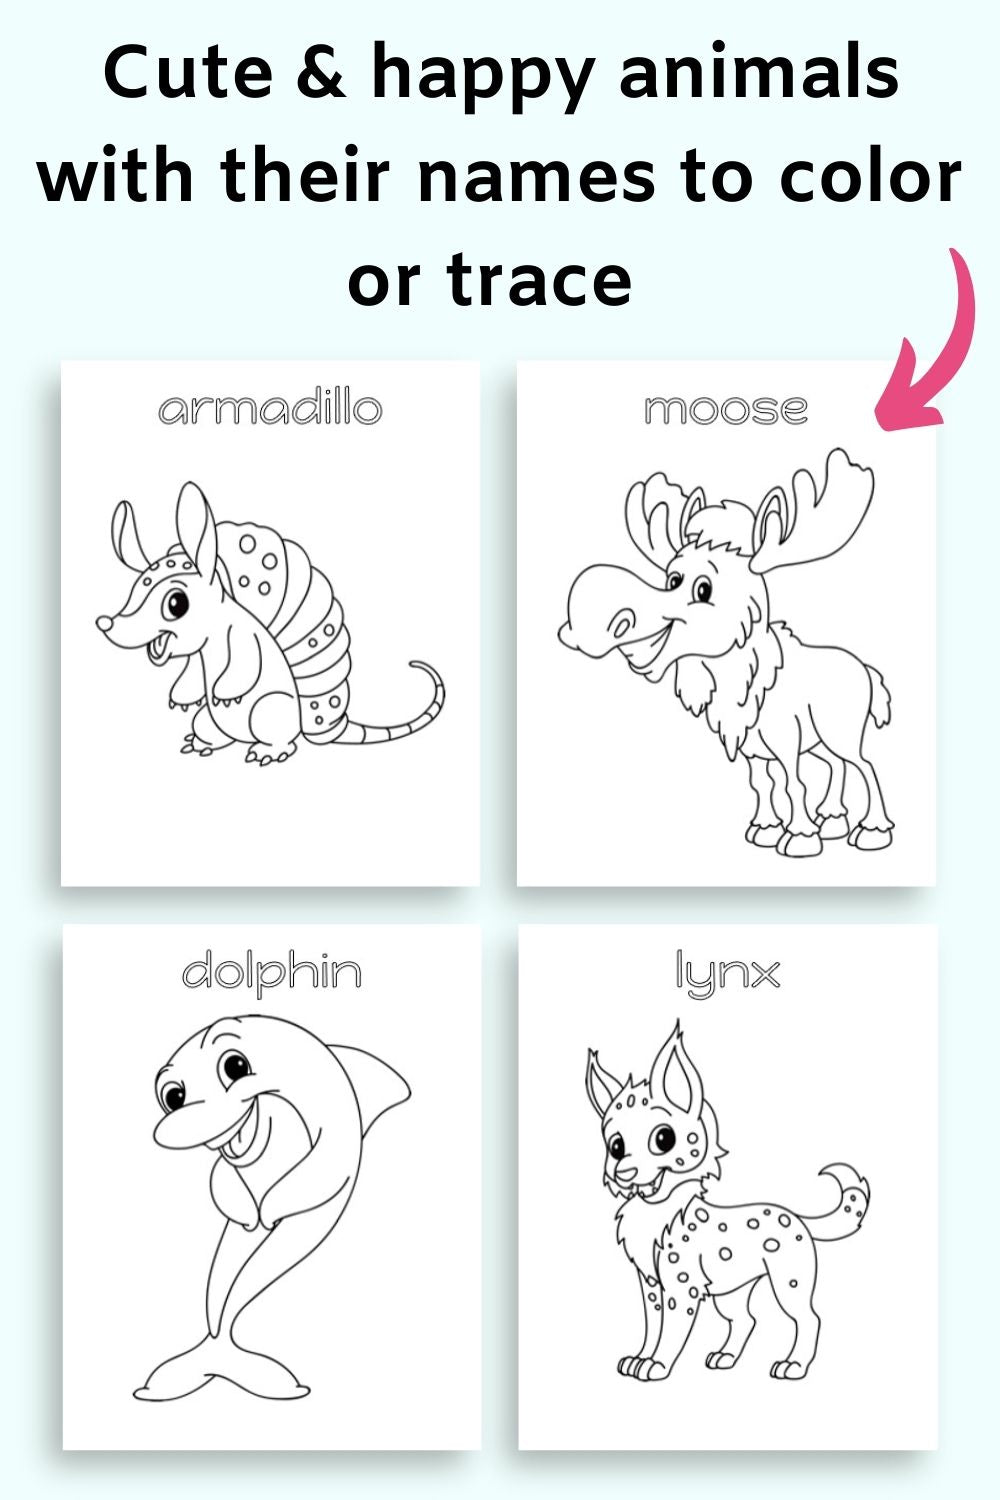 Text "cute and happy animals with their names to color or trace" with four cute animal coloring pages: an armadillo, a moose, a dolphin, and a lynx.